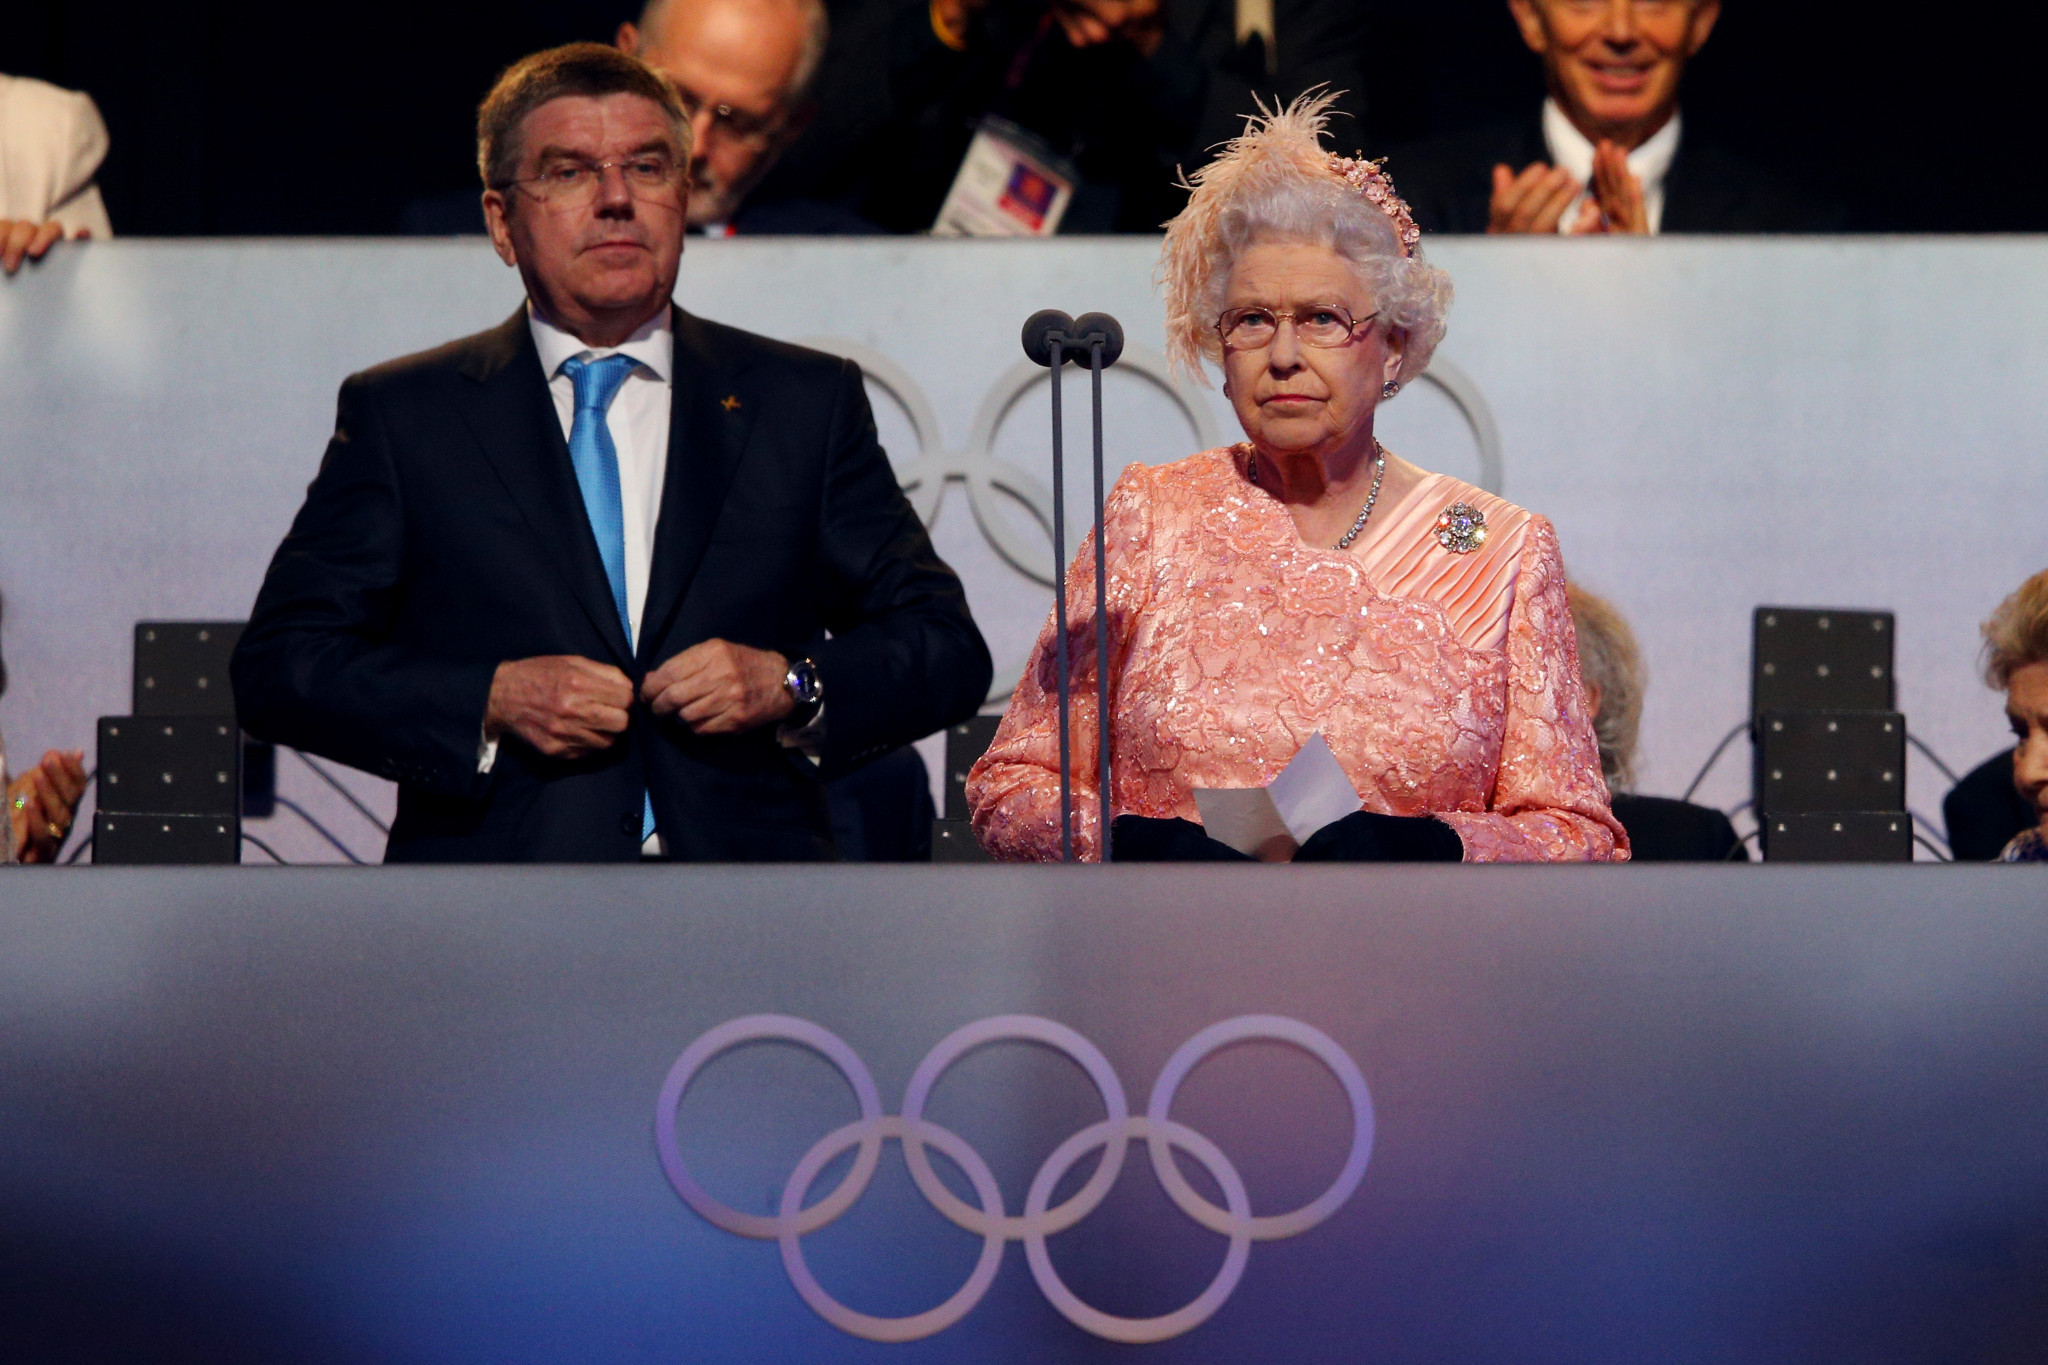 Queen Elizabeth II opens the London 2012 Olympic Games ©Getty Images